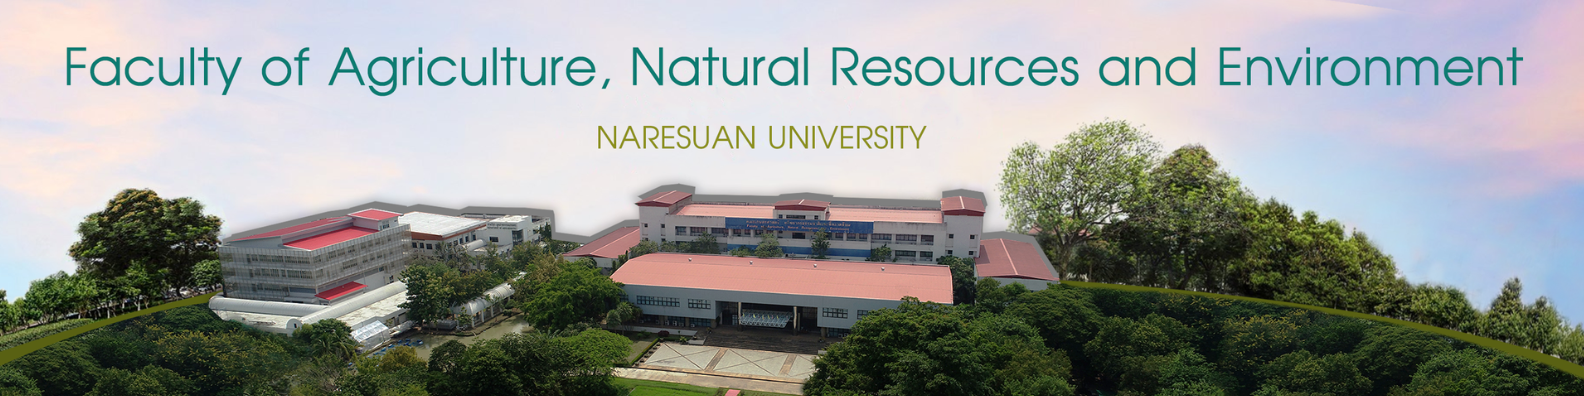 Faculty of Agriculture, Natural Resources and Environment